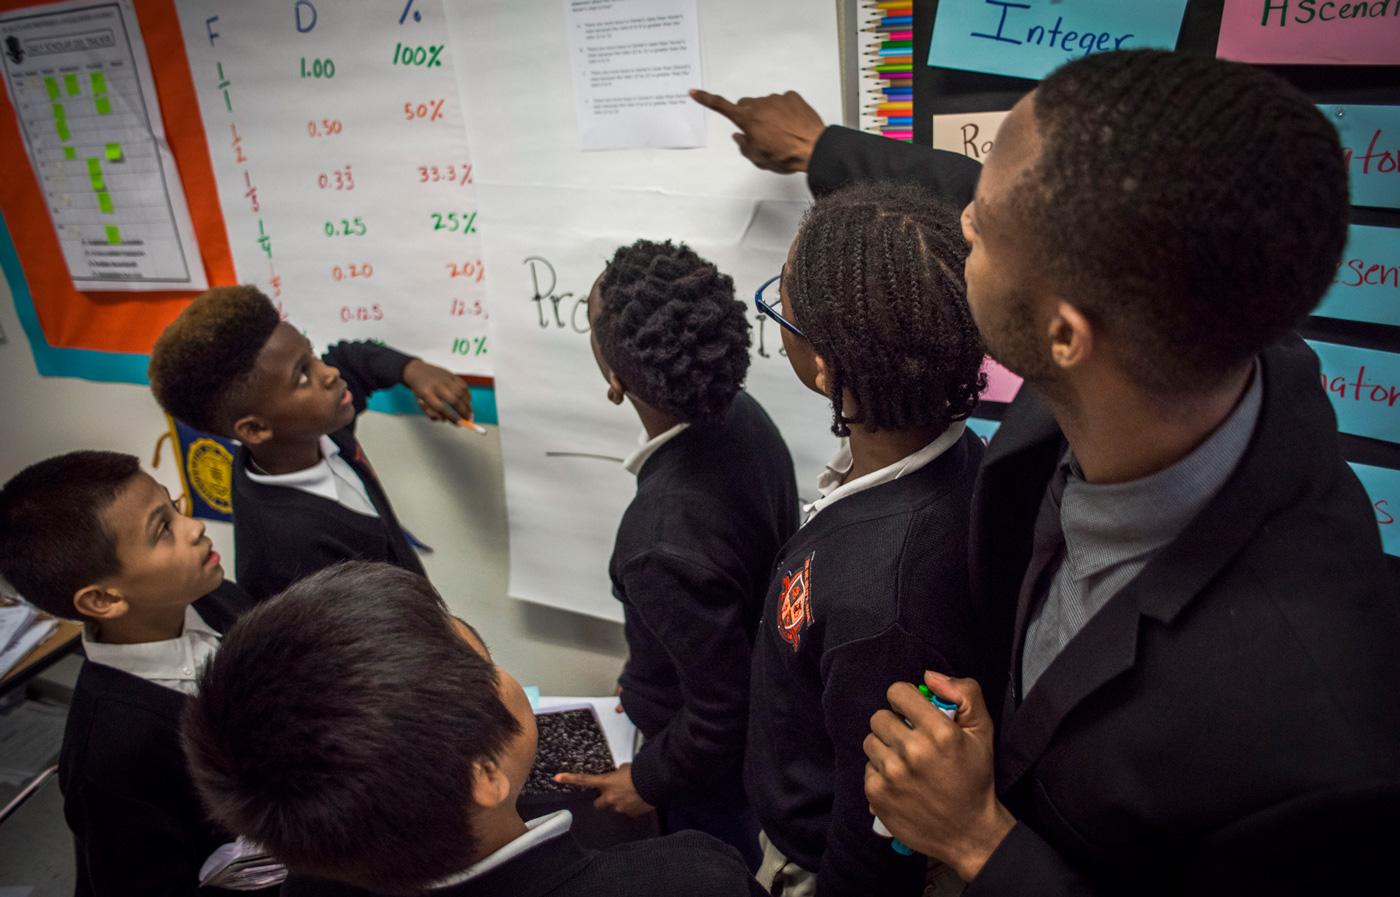 Male teacher showing students information on a whiteboard